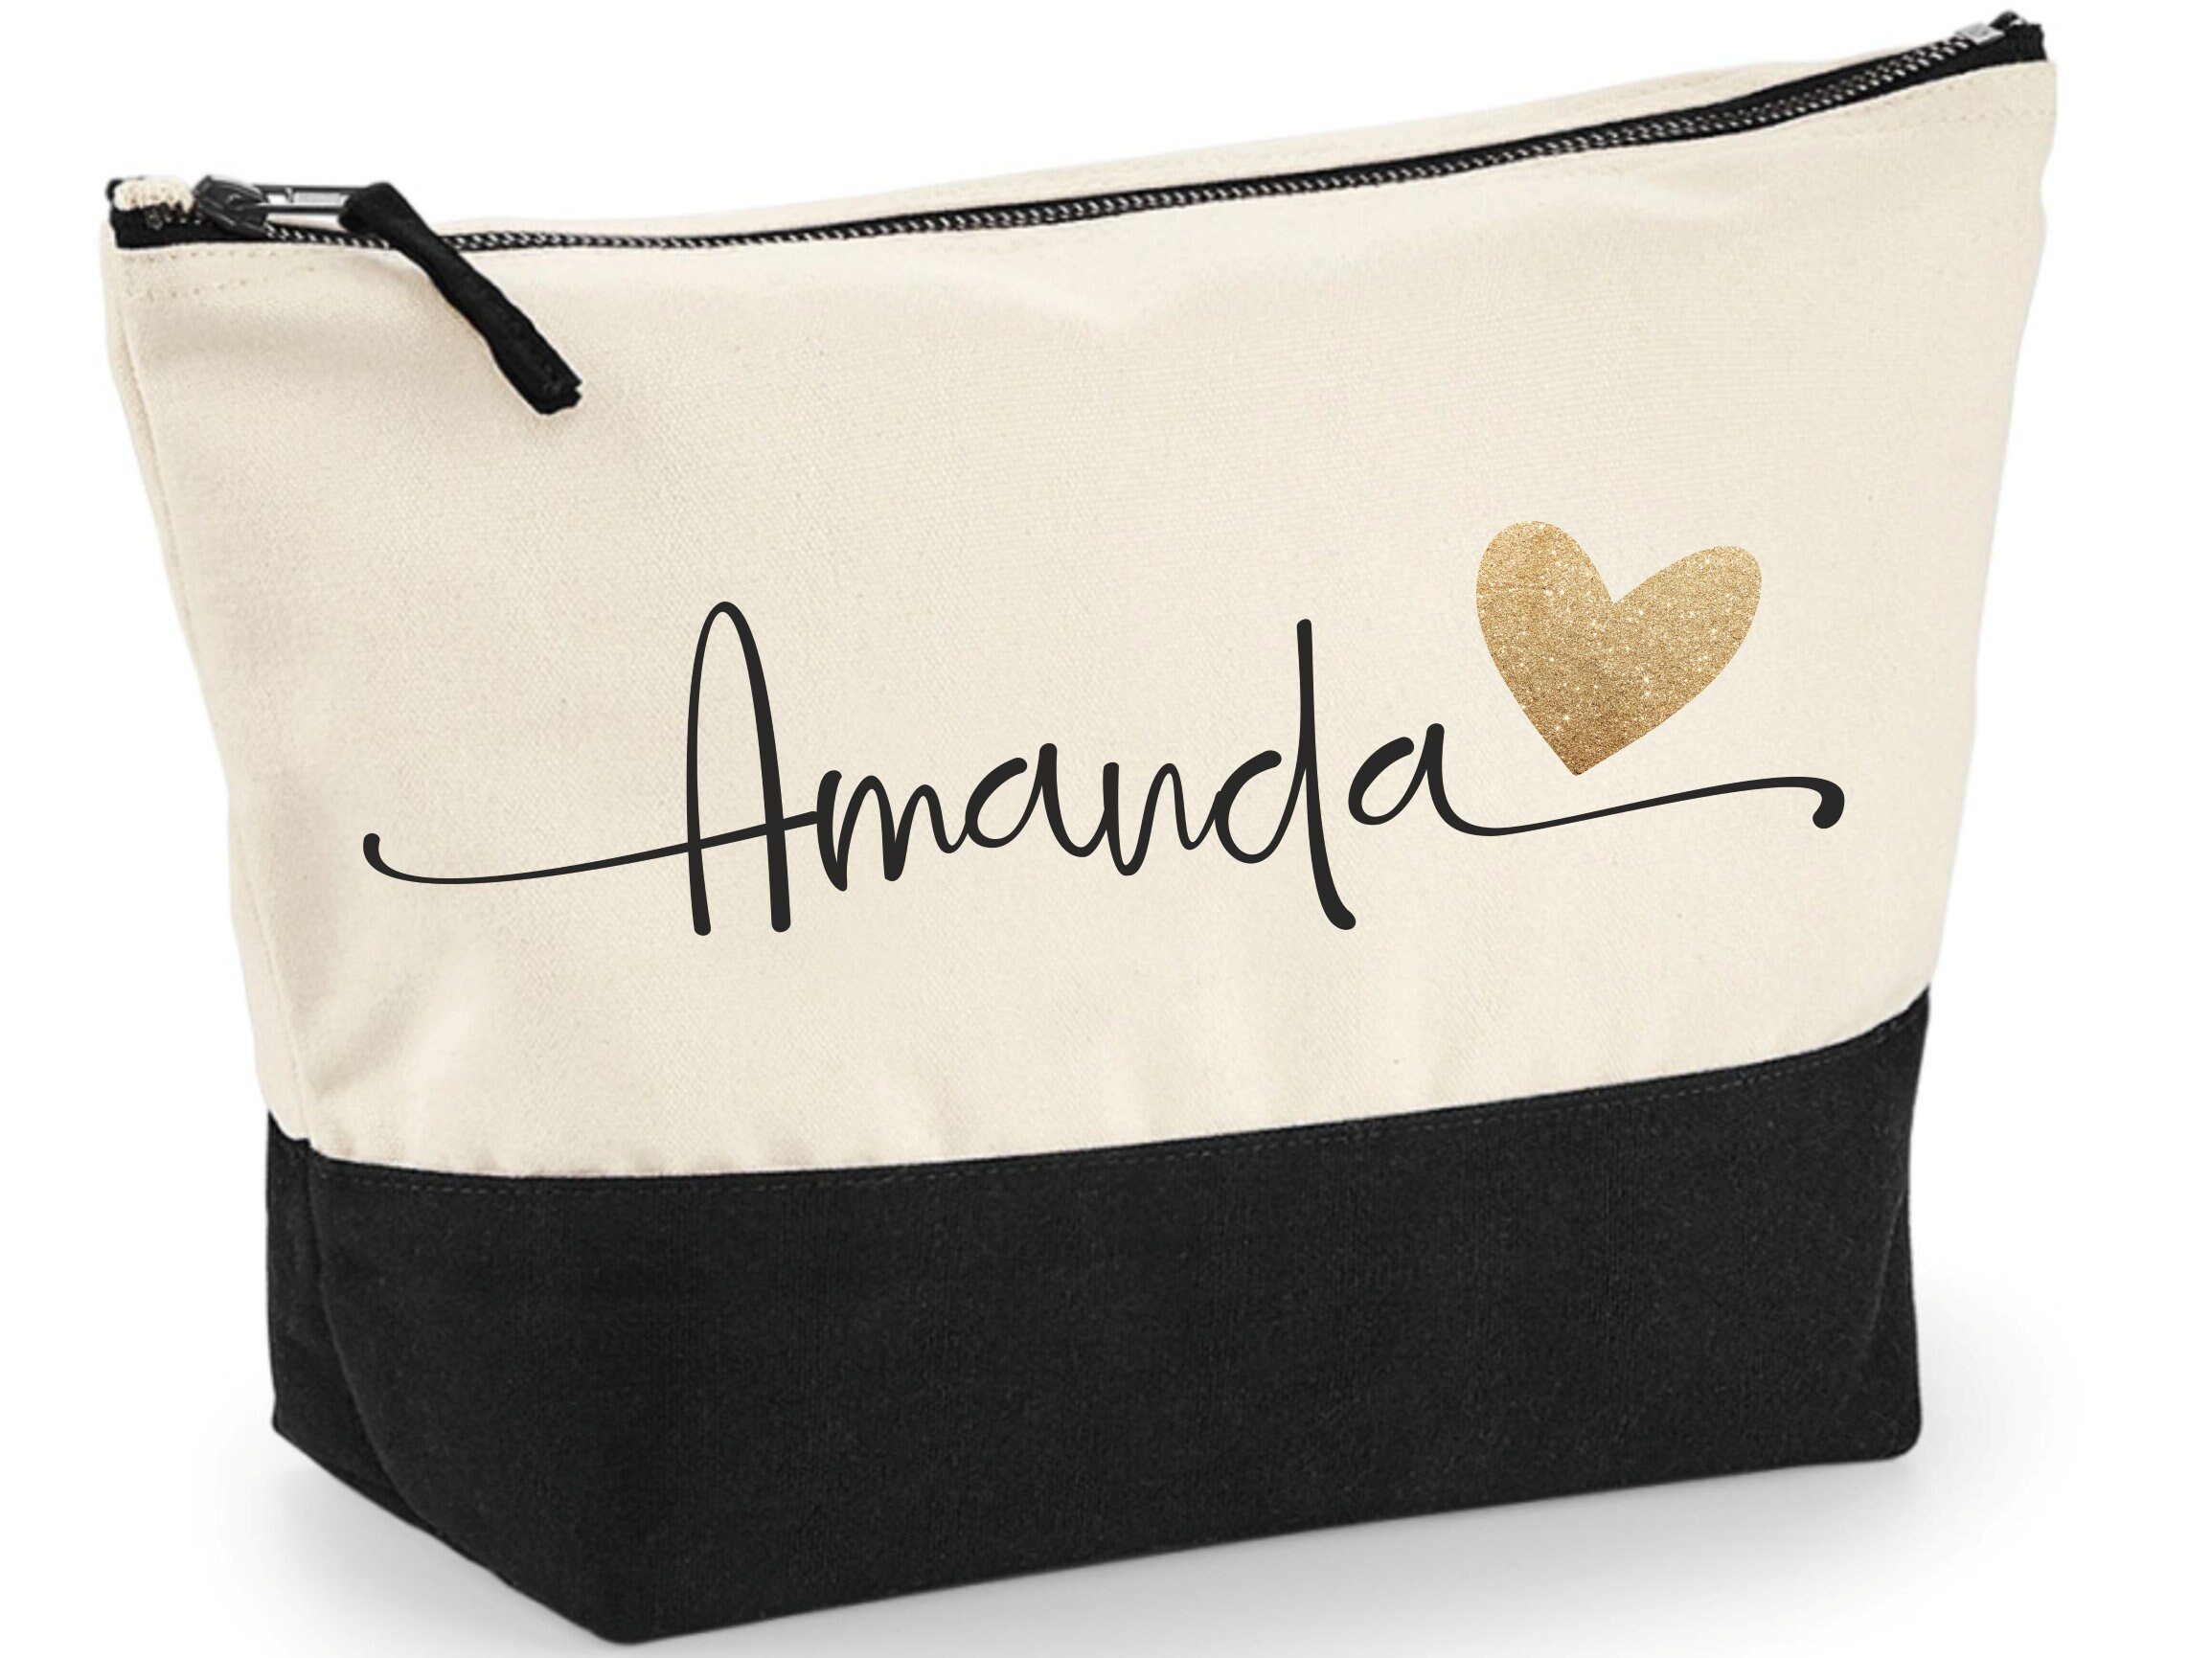 Personalized Make Up Bag, Birthday Gifts for Teen Girls 12-14 Best Friend,  Cute Birthday Gifts for Teen Girls Best Friends, Customized Gift